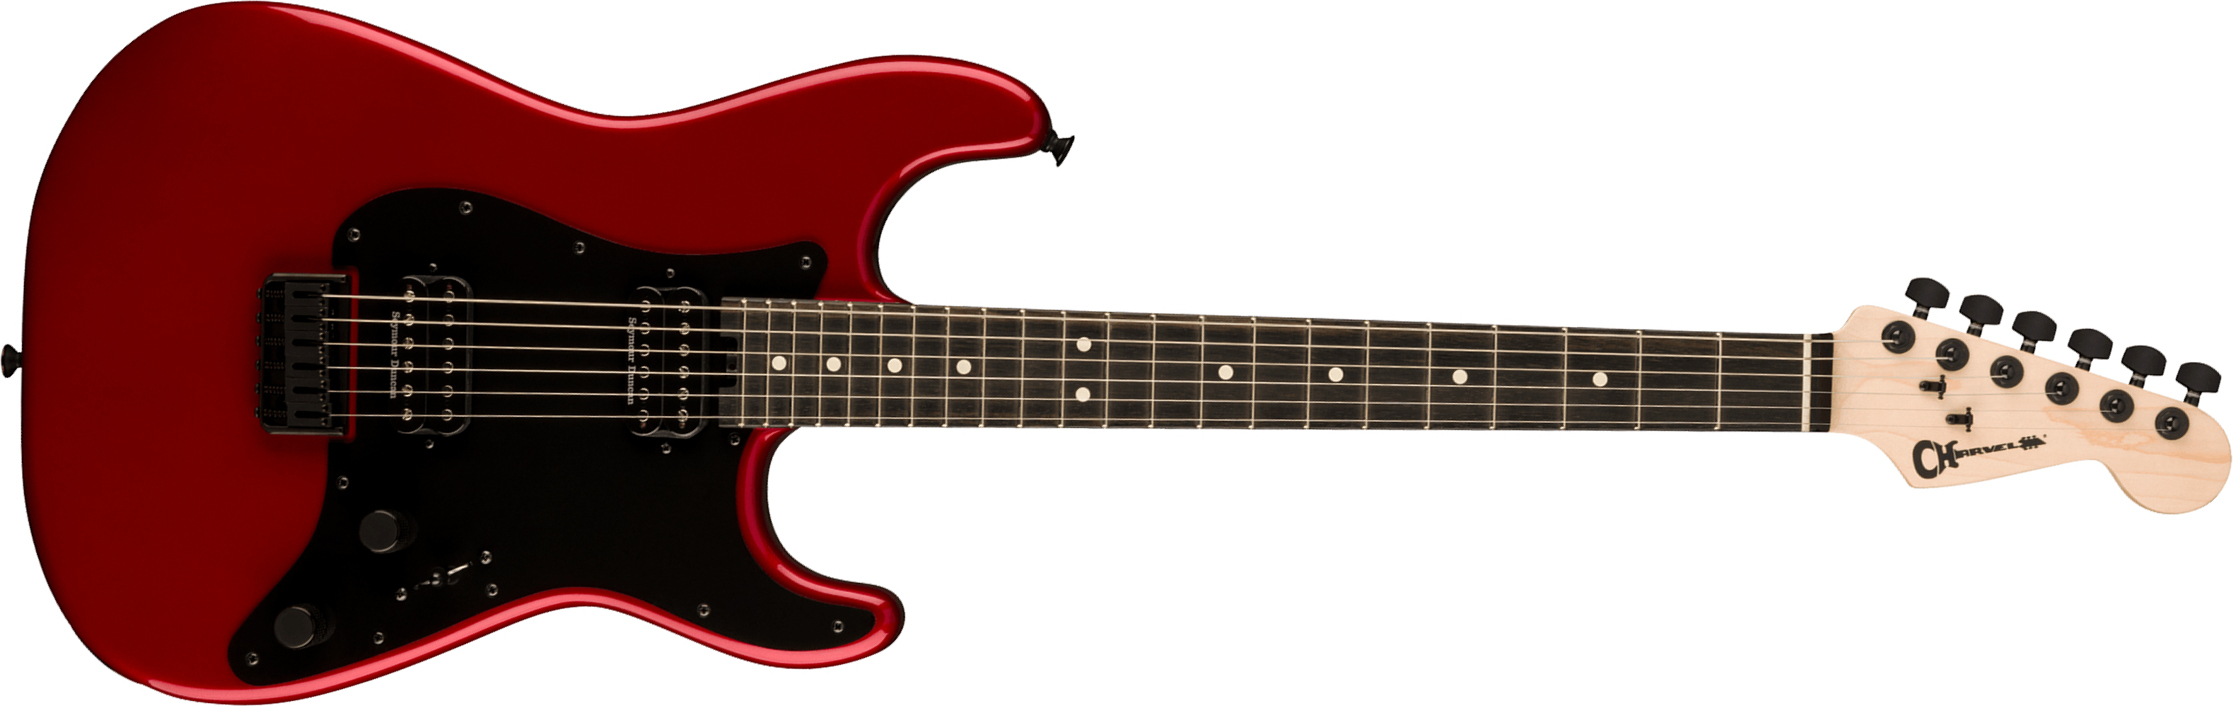 Charvel So-cal Style 1 Hh Ht E Pro-mod 2h Seymour Duncan Eb - Candy Apple Red - Str shape electric guitar - Main picture